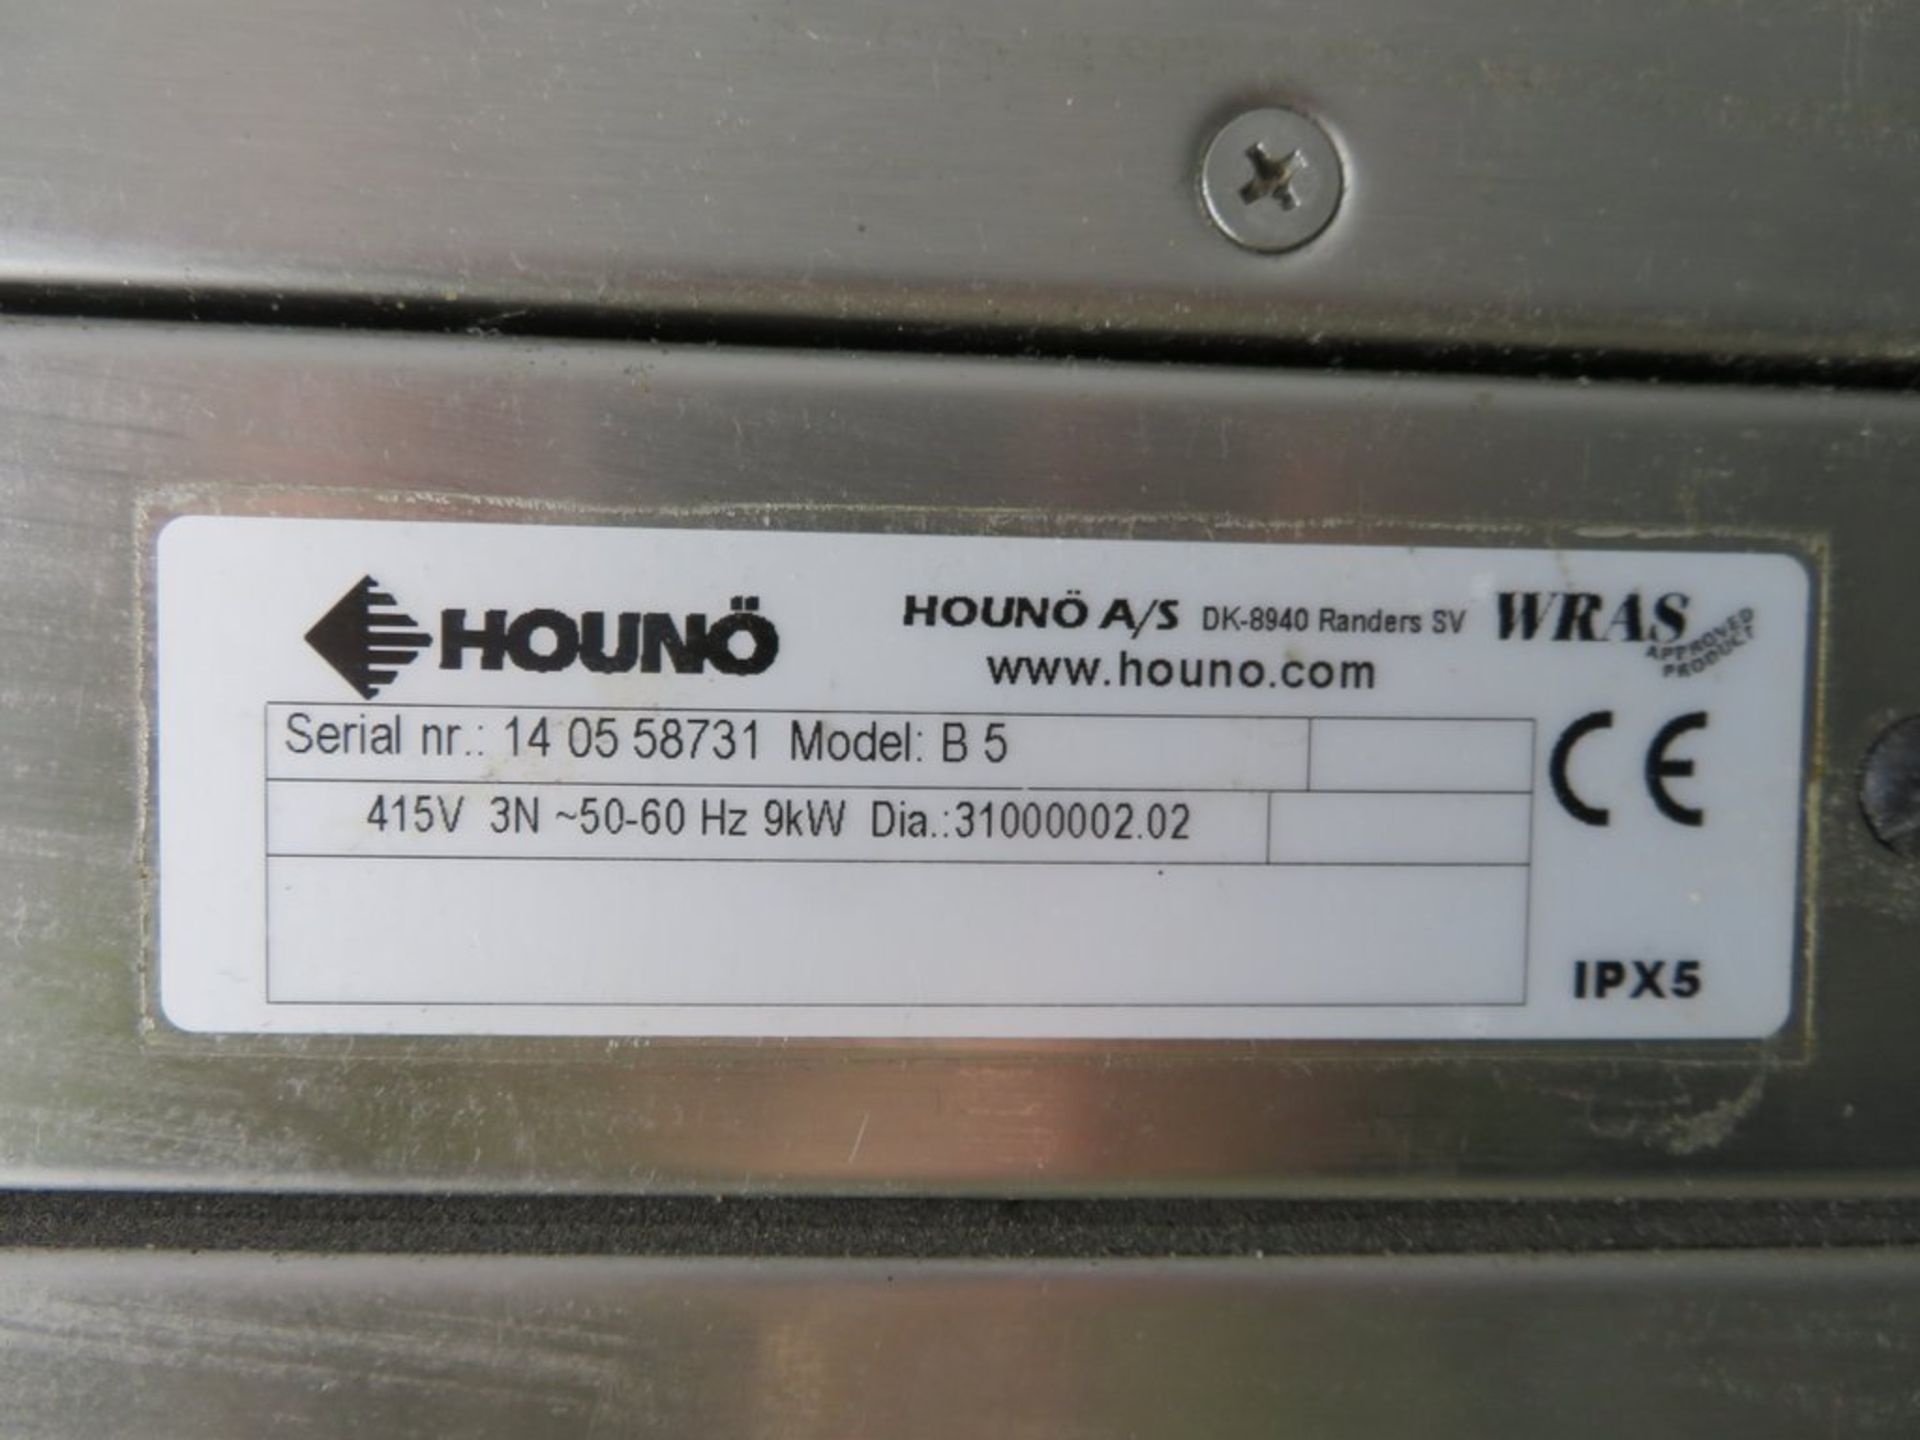 Houno B5 5 grid combi oven, 3 phase electric, dual opening front and back - Image 9 of 9